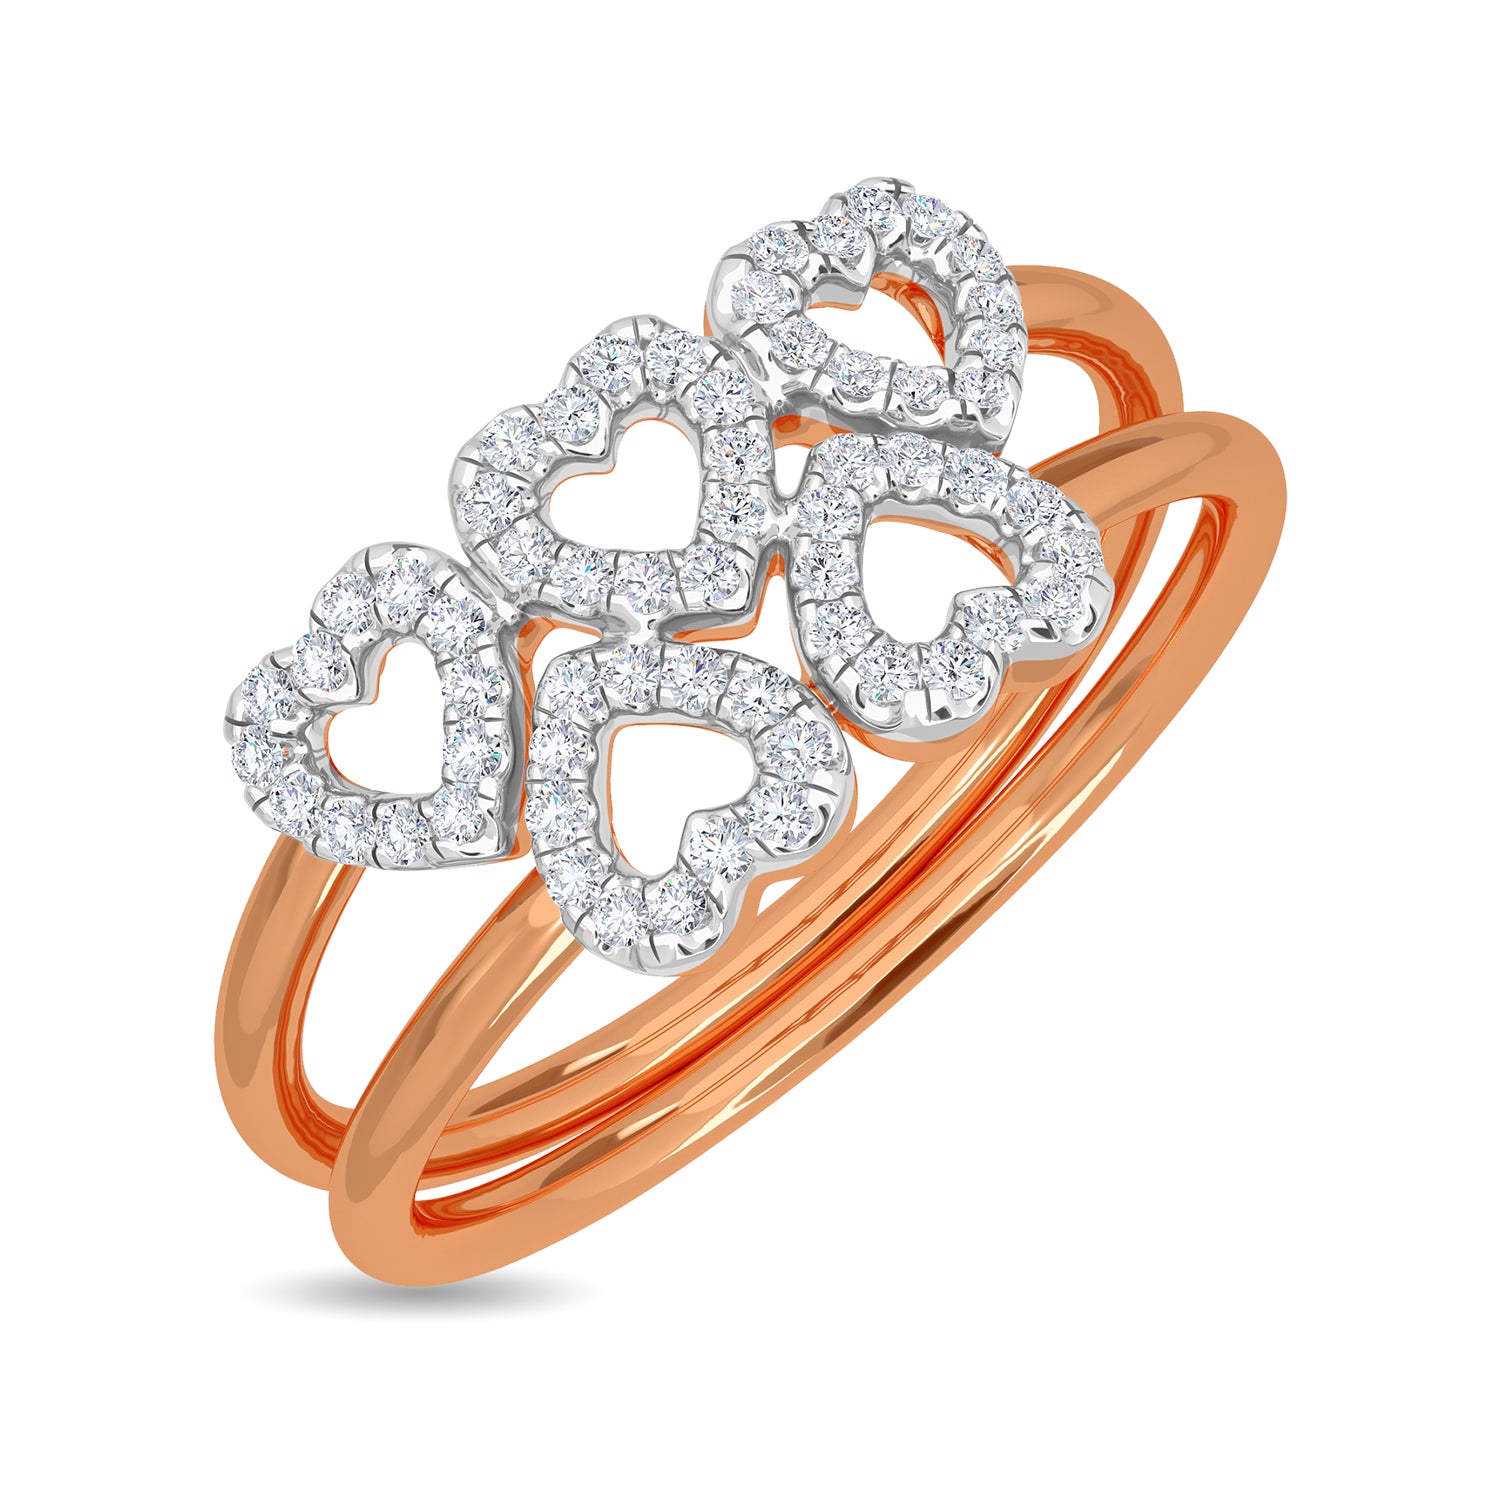 Buy Two Layered Heart Ring Online From Kisna